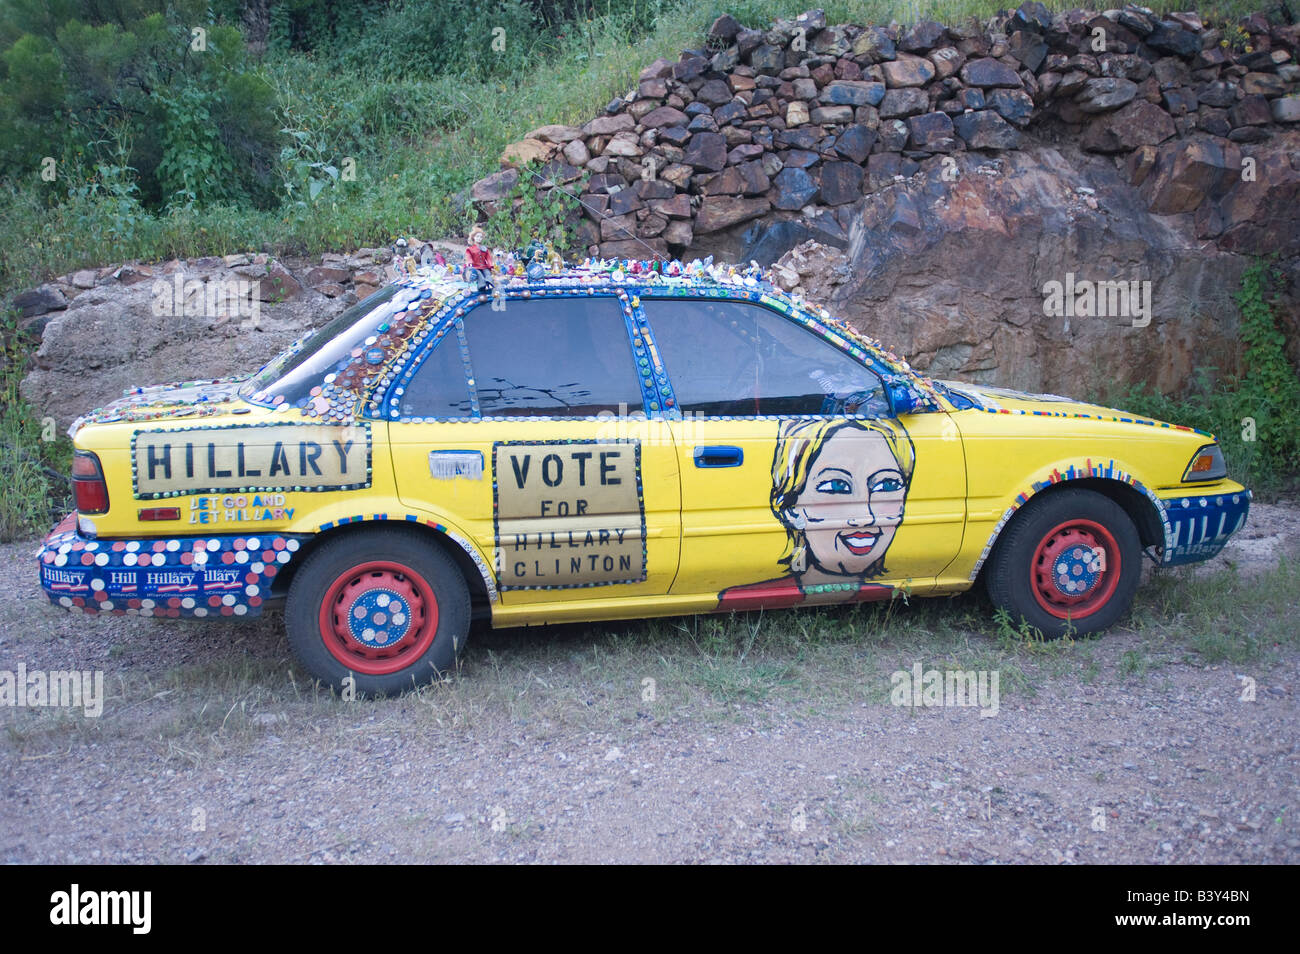 Vote for Hillary Clinton car - - Car decorated by avid fan of Senator Hillary Clinton (NY) urging voters to elect her Stock Photo